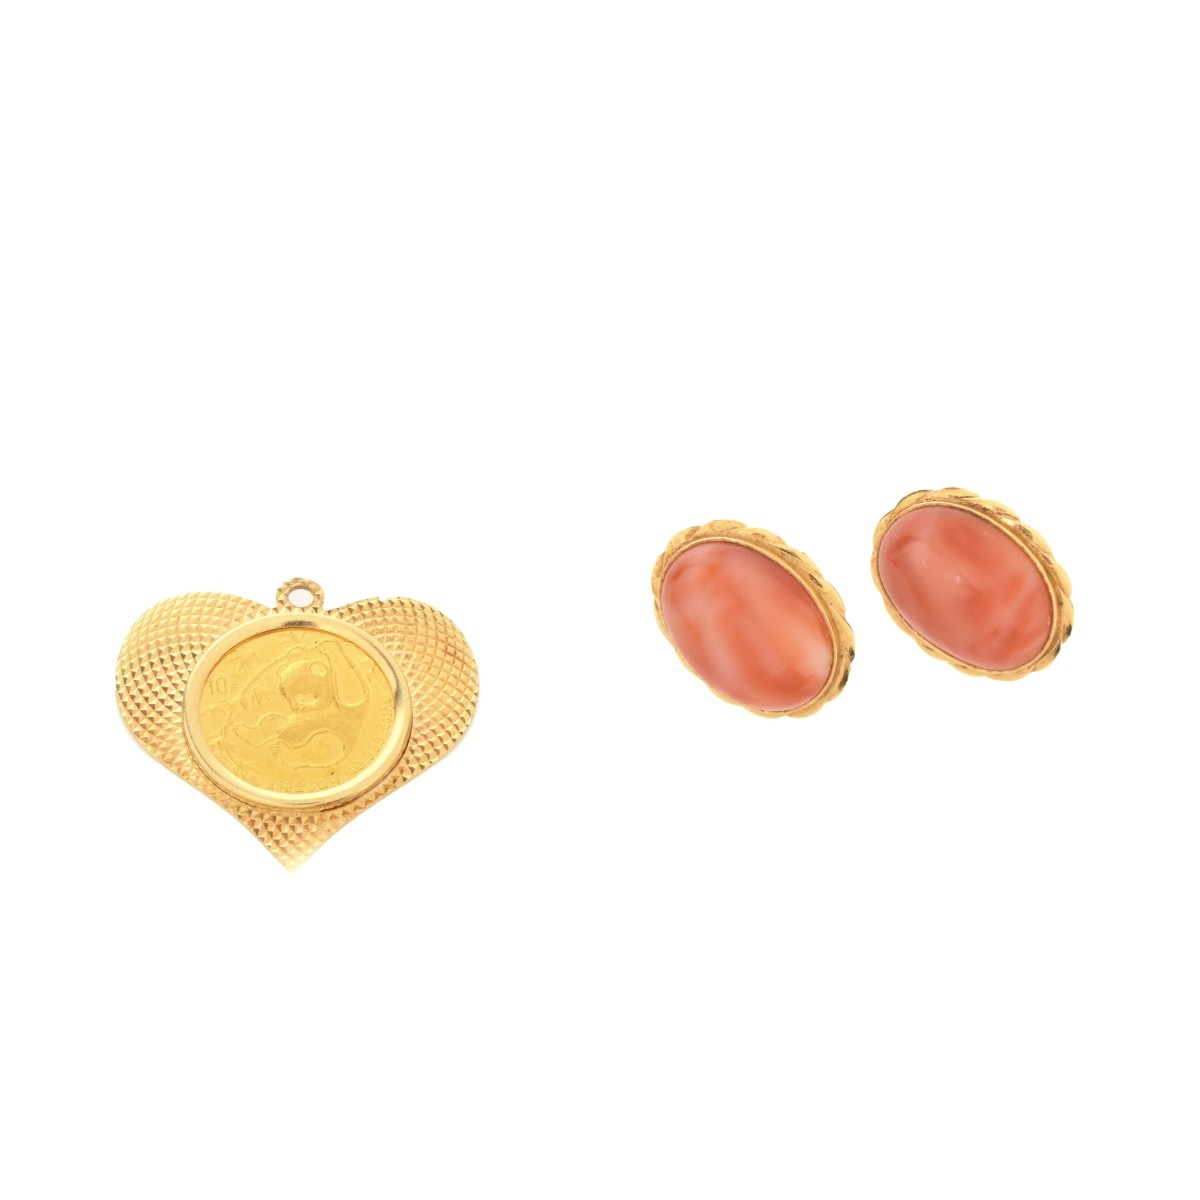 10 Yuan Coin Pendant and Coral 14K Earrings